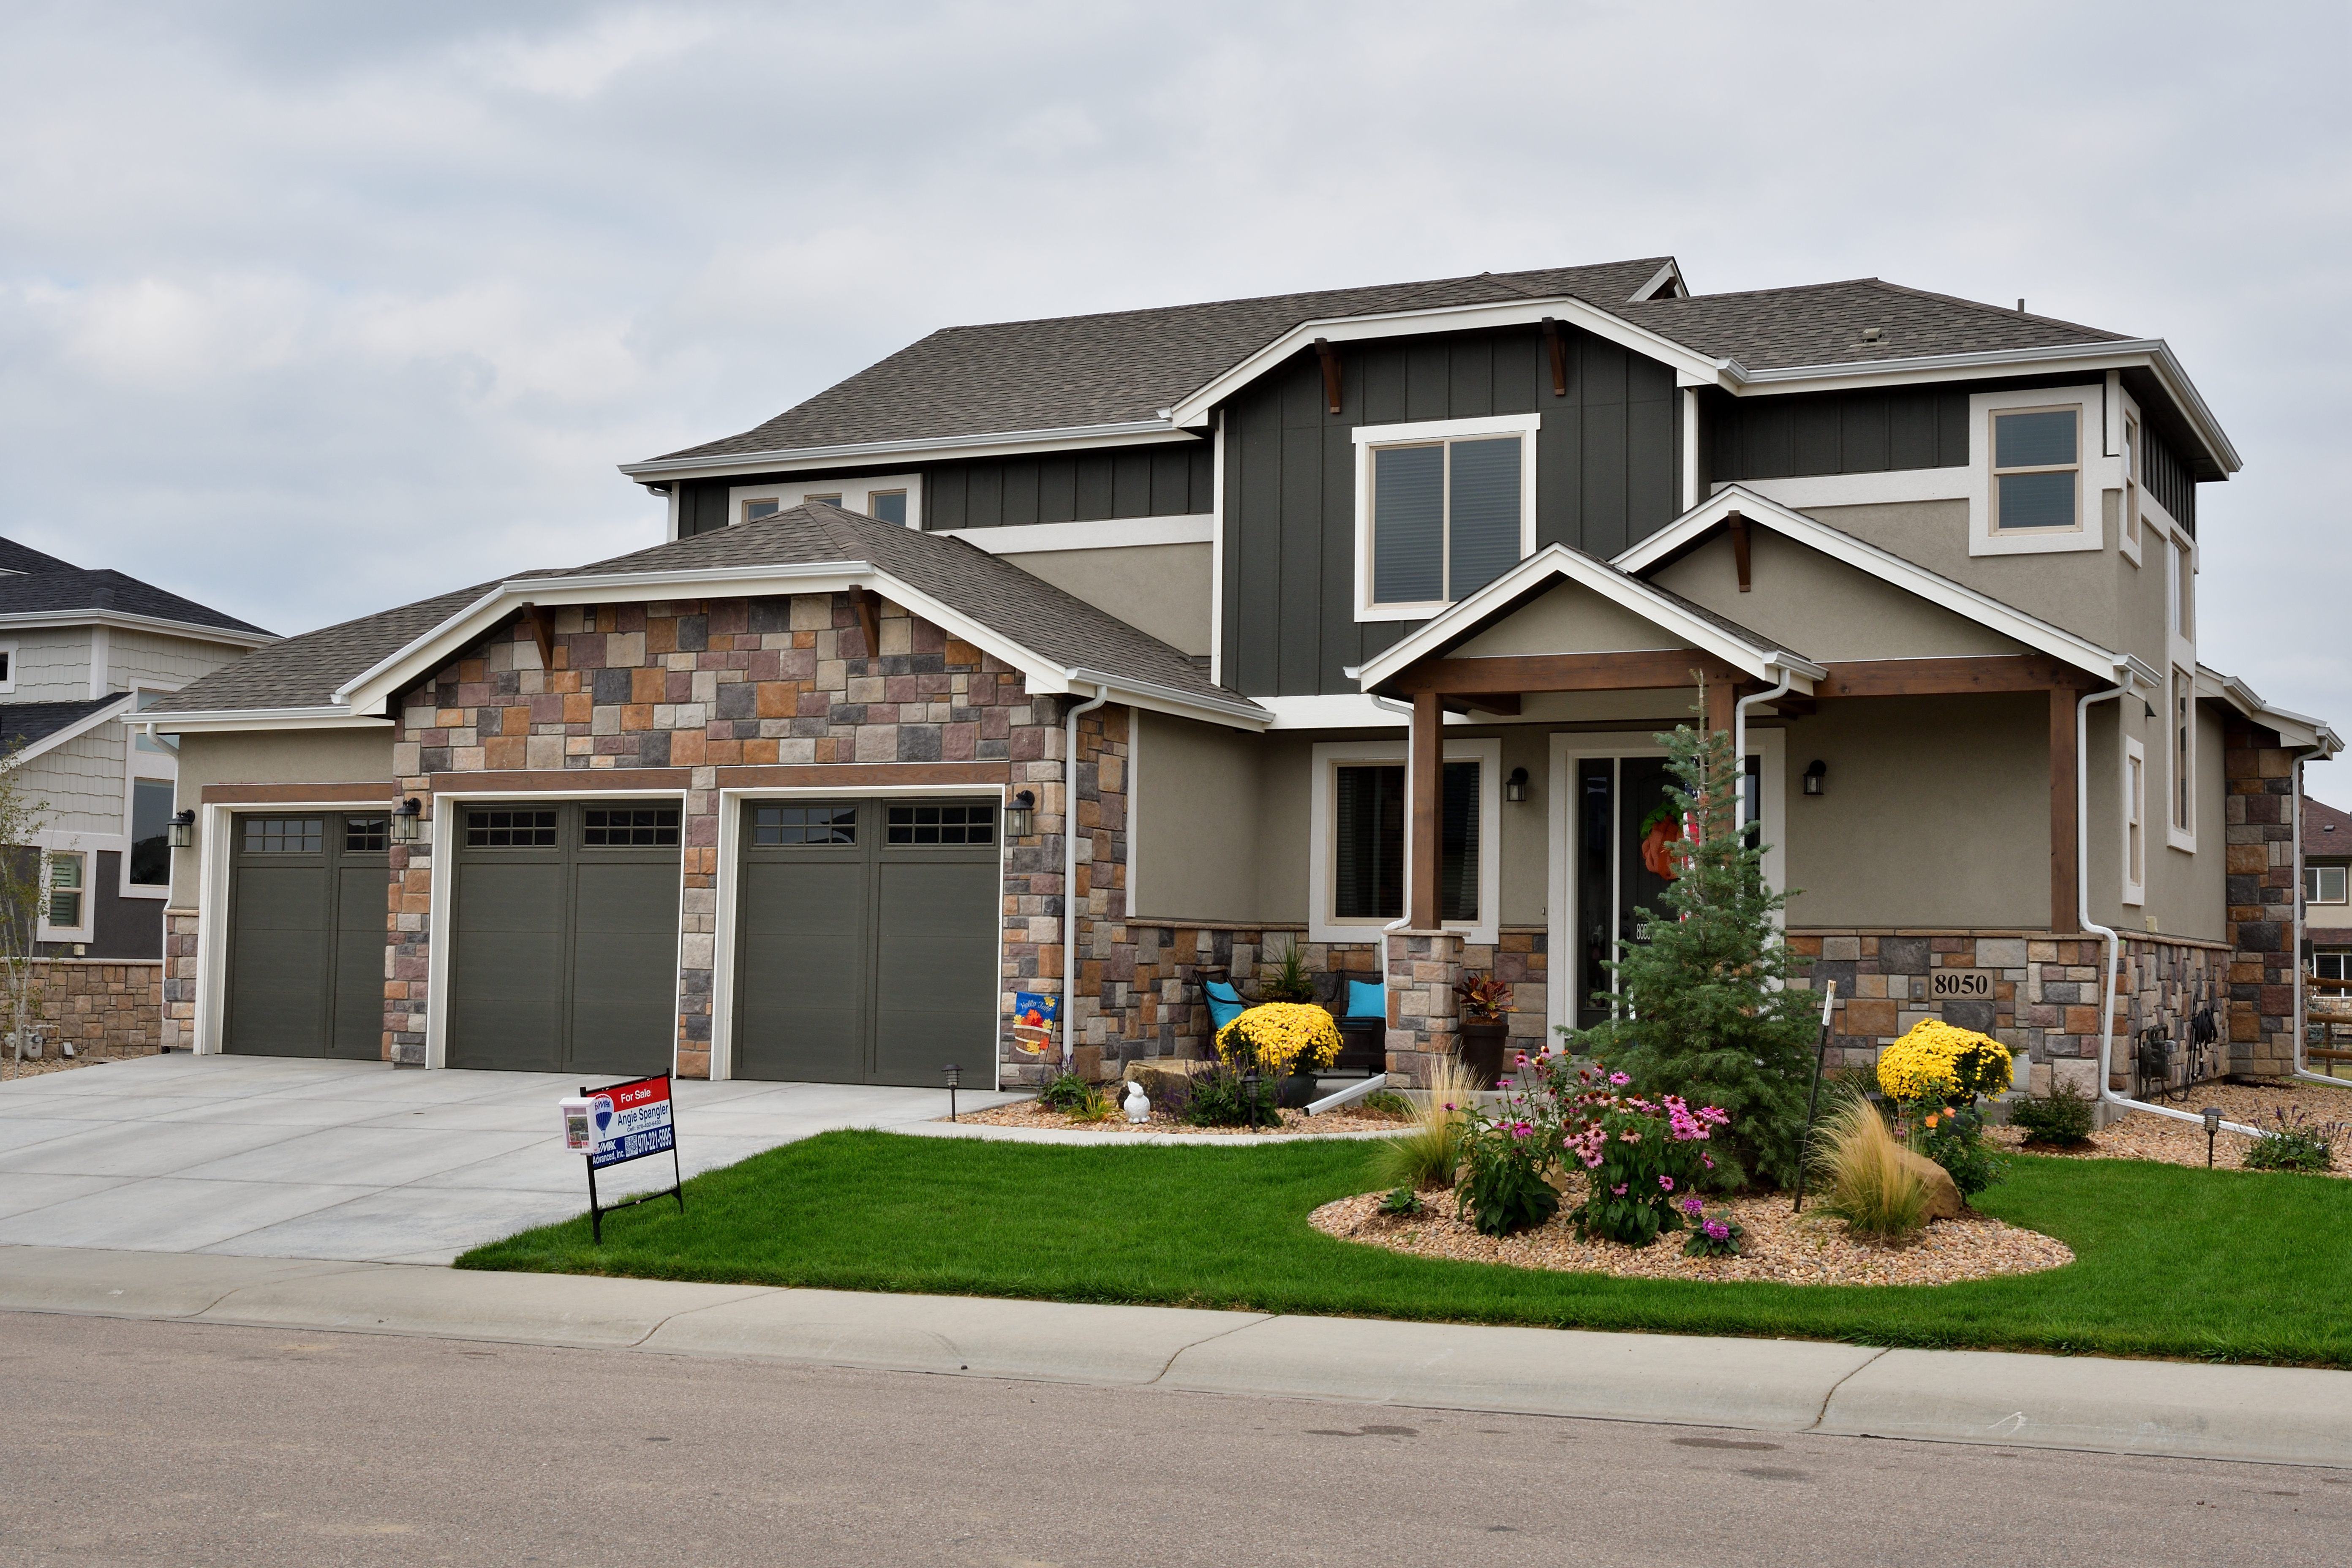 Home for Sale in Northern Colorado - SOLD - Fort Collins Real Estate by ...